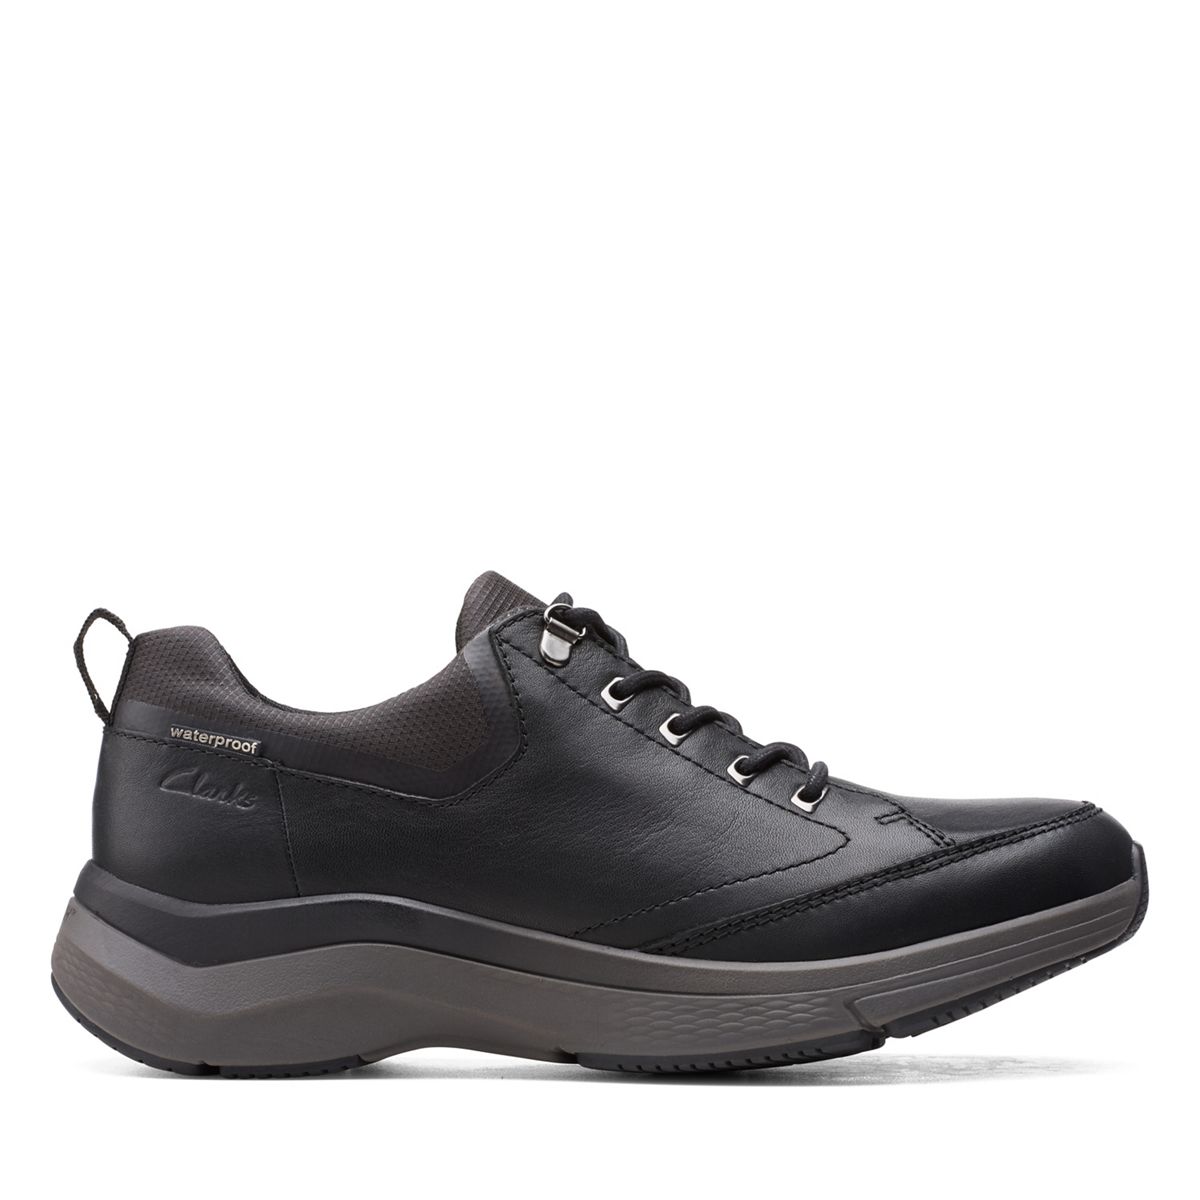 Wave Vibe Black Leather - Clarks Canada Official Site | Clarks Shoes